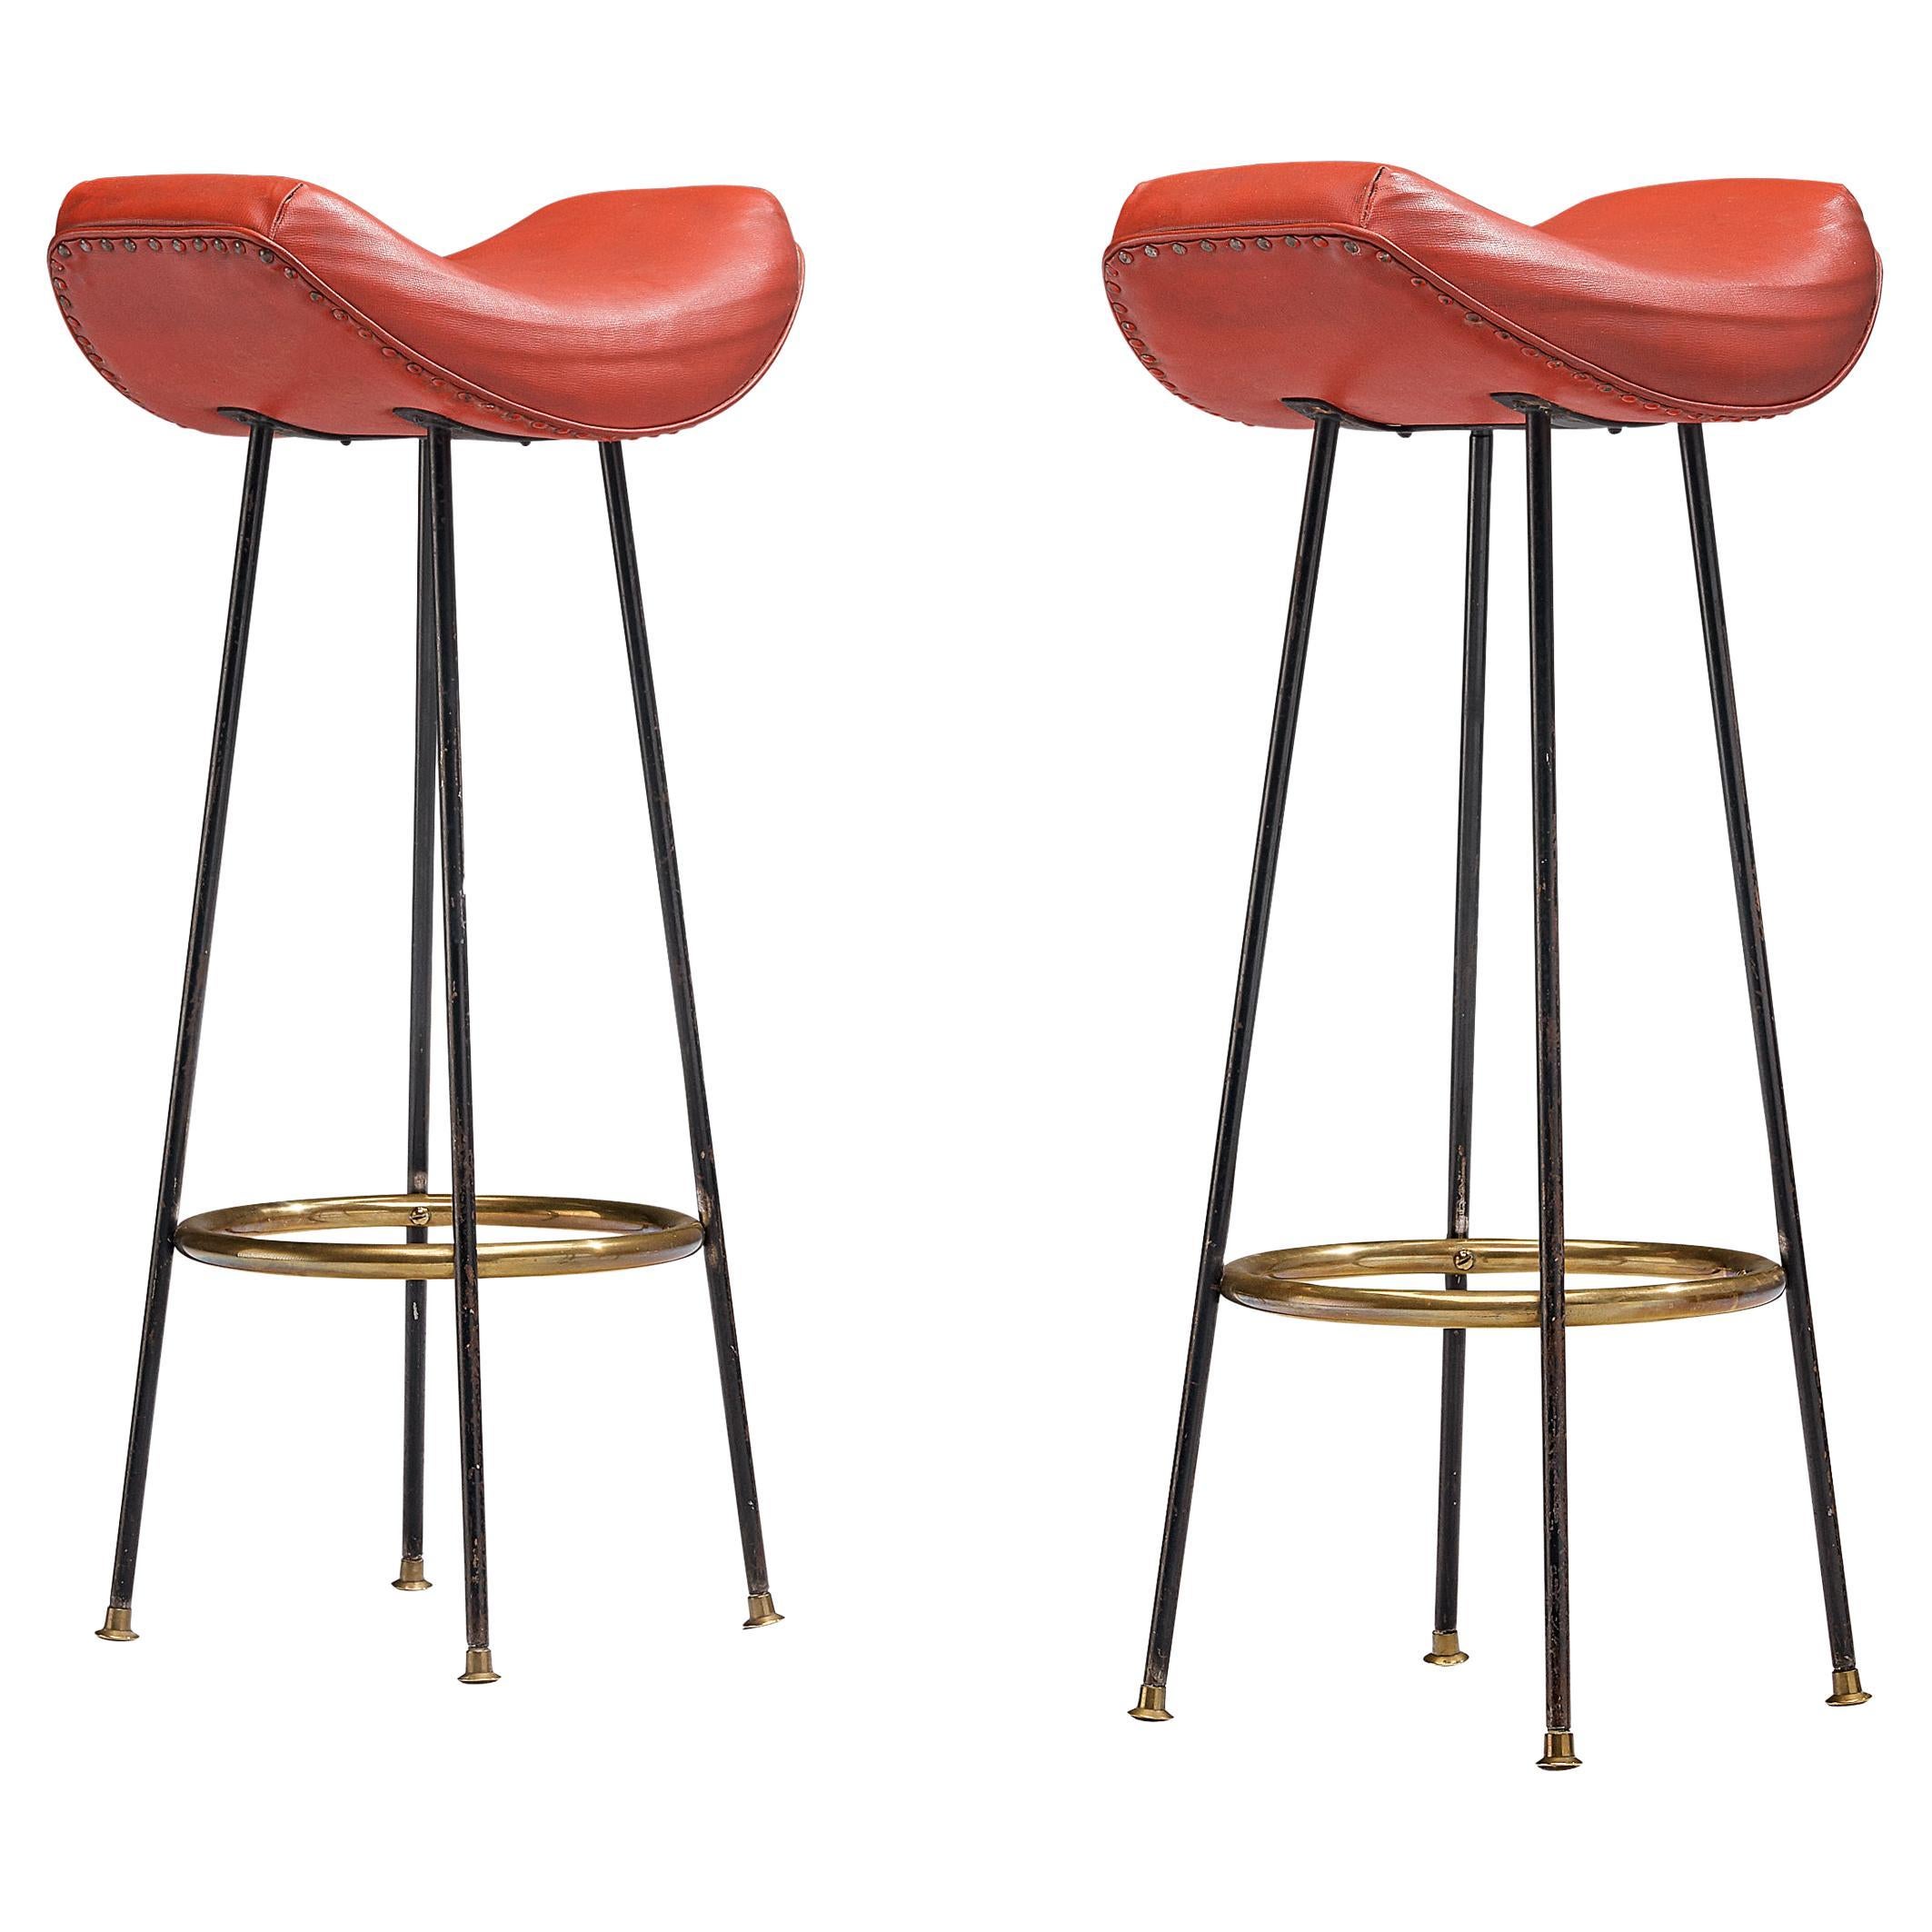 Martin Eisler for Forma Pair of Bar Stools in Red Leather